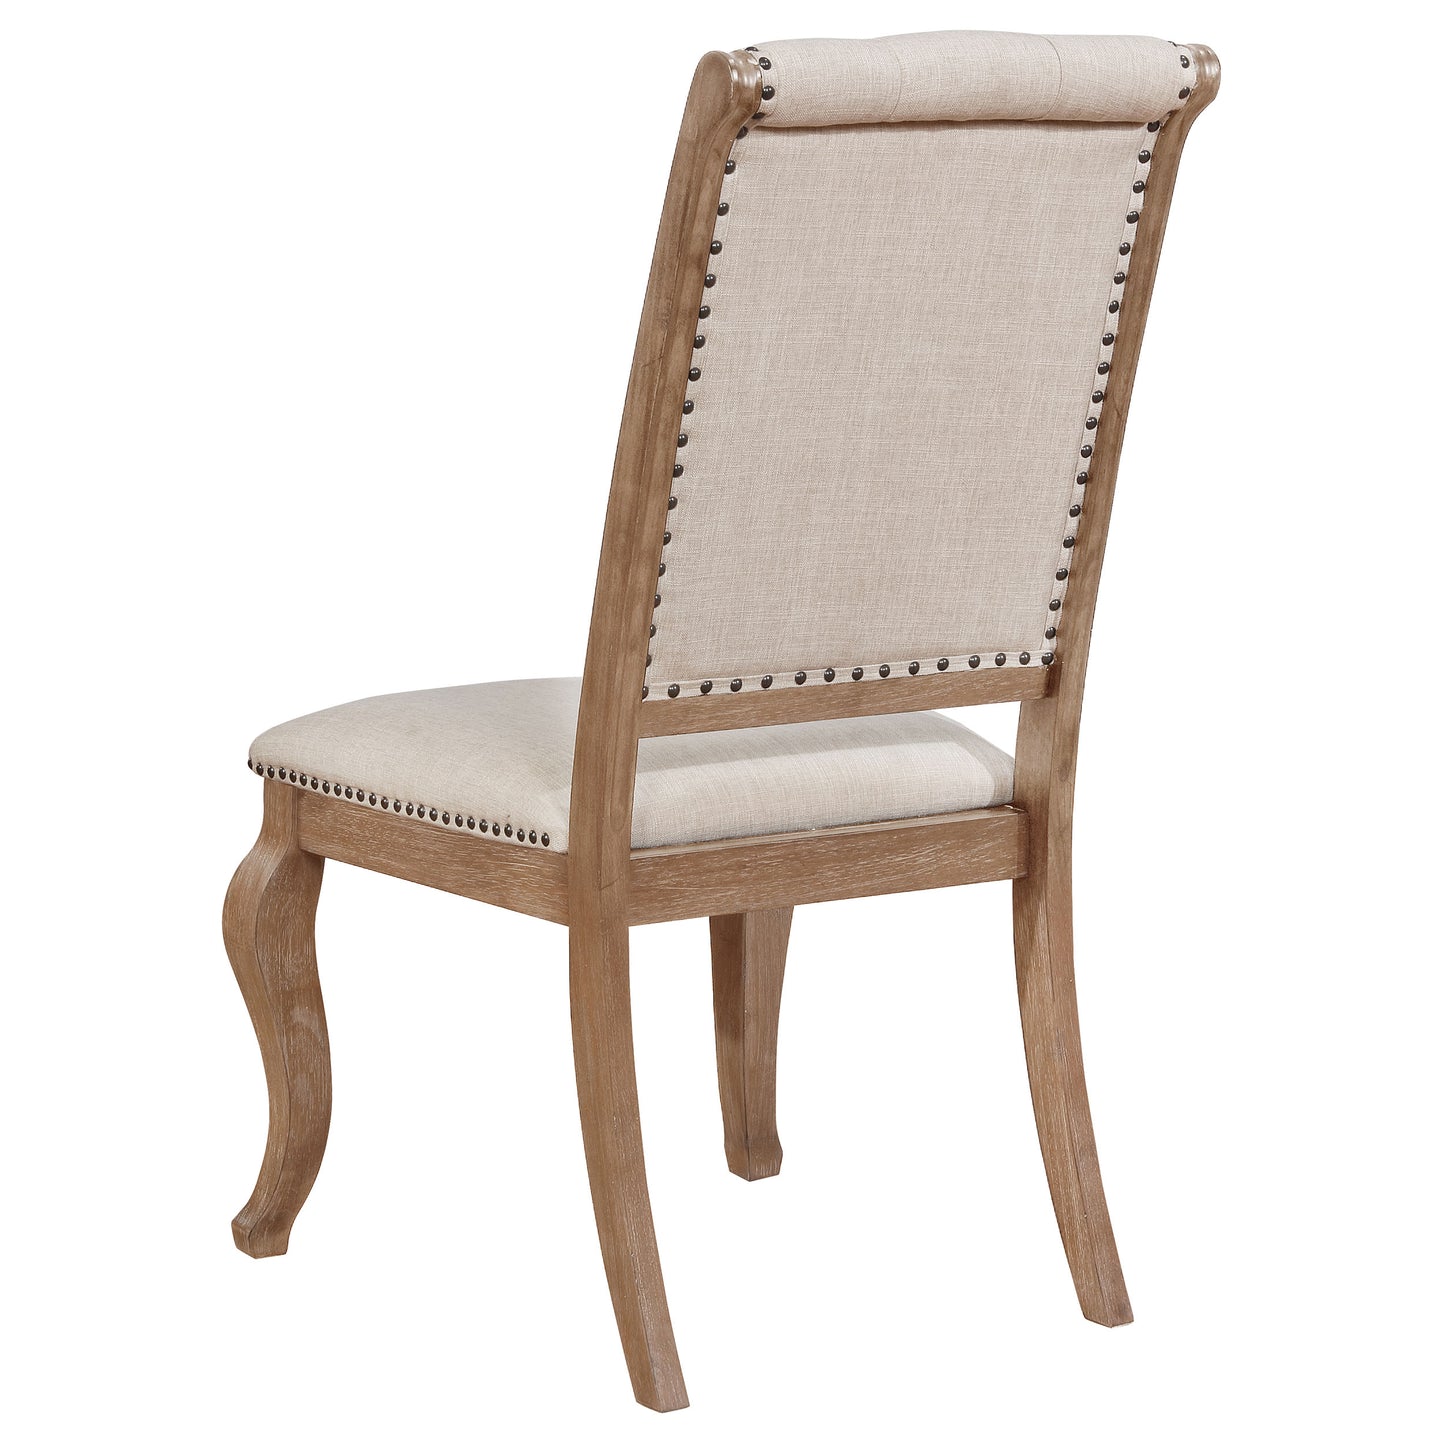 Brockway Tufted Side Chairs Cream and Barley Brown (Set of 2)